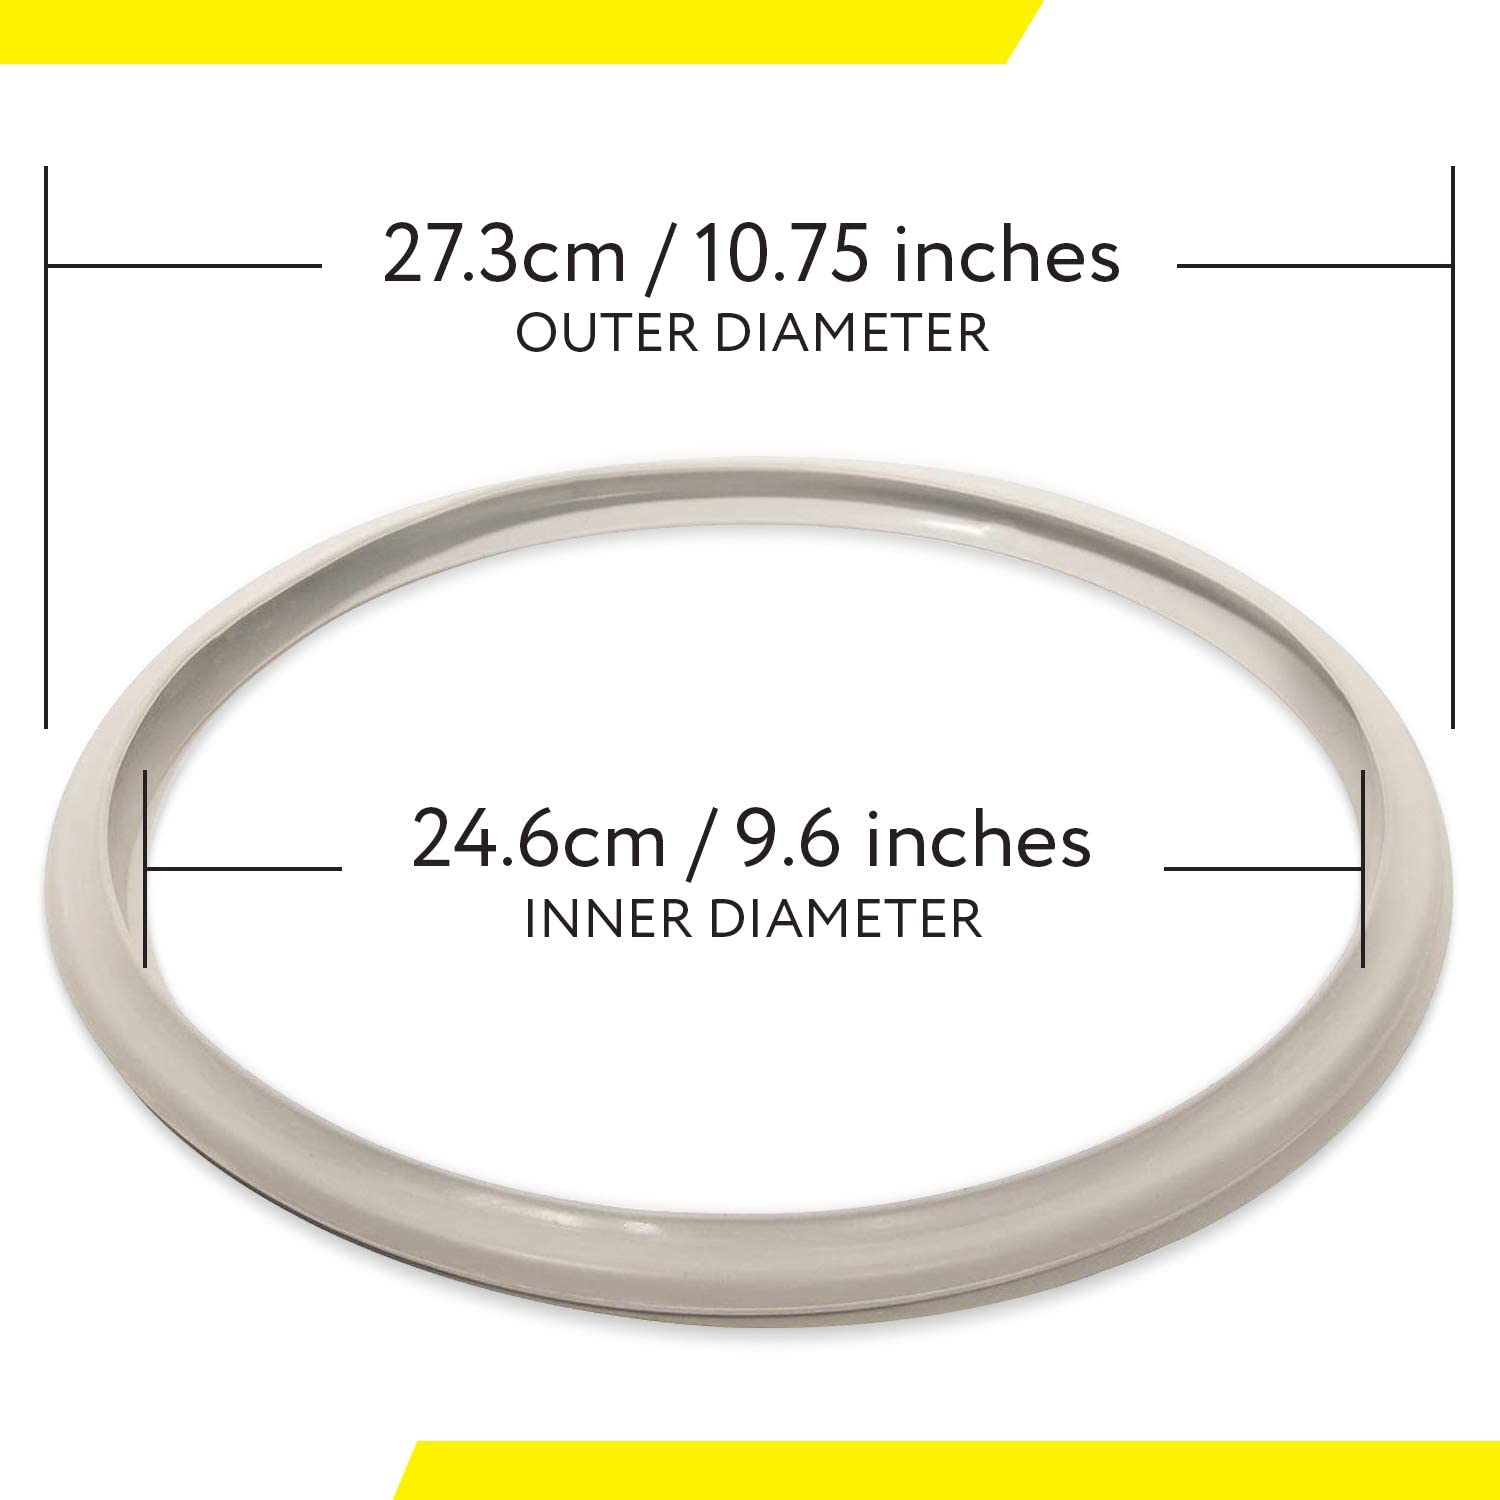 Impresa - 10 inch Fagor Pressure Cooker Replacement Gasket - Fits Many 8 and 10 Quart Fagor Stovetop Models (2 Pack) - image 4 of 5